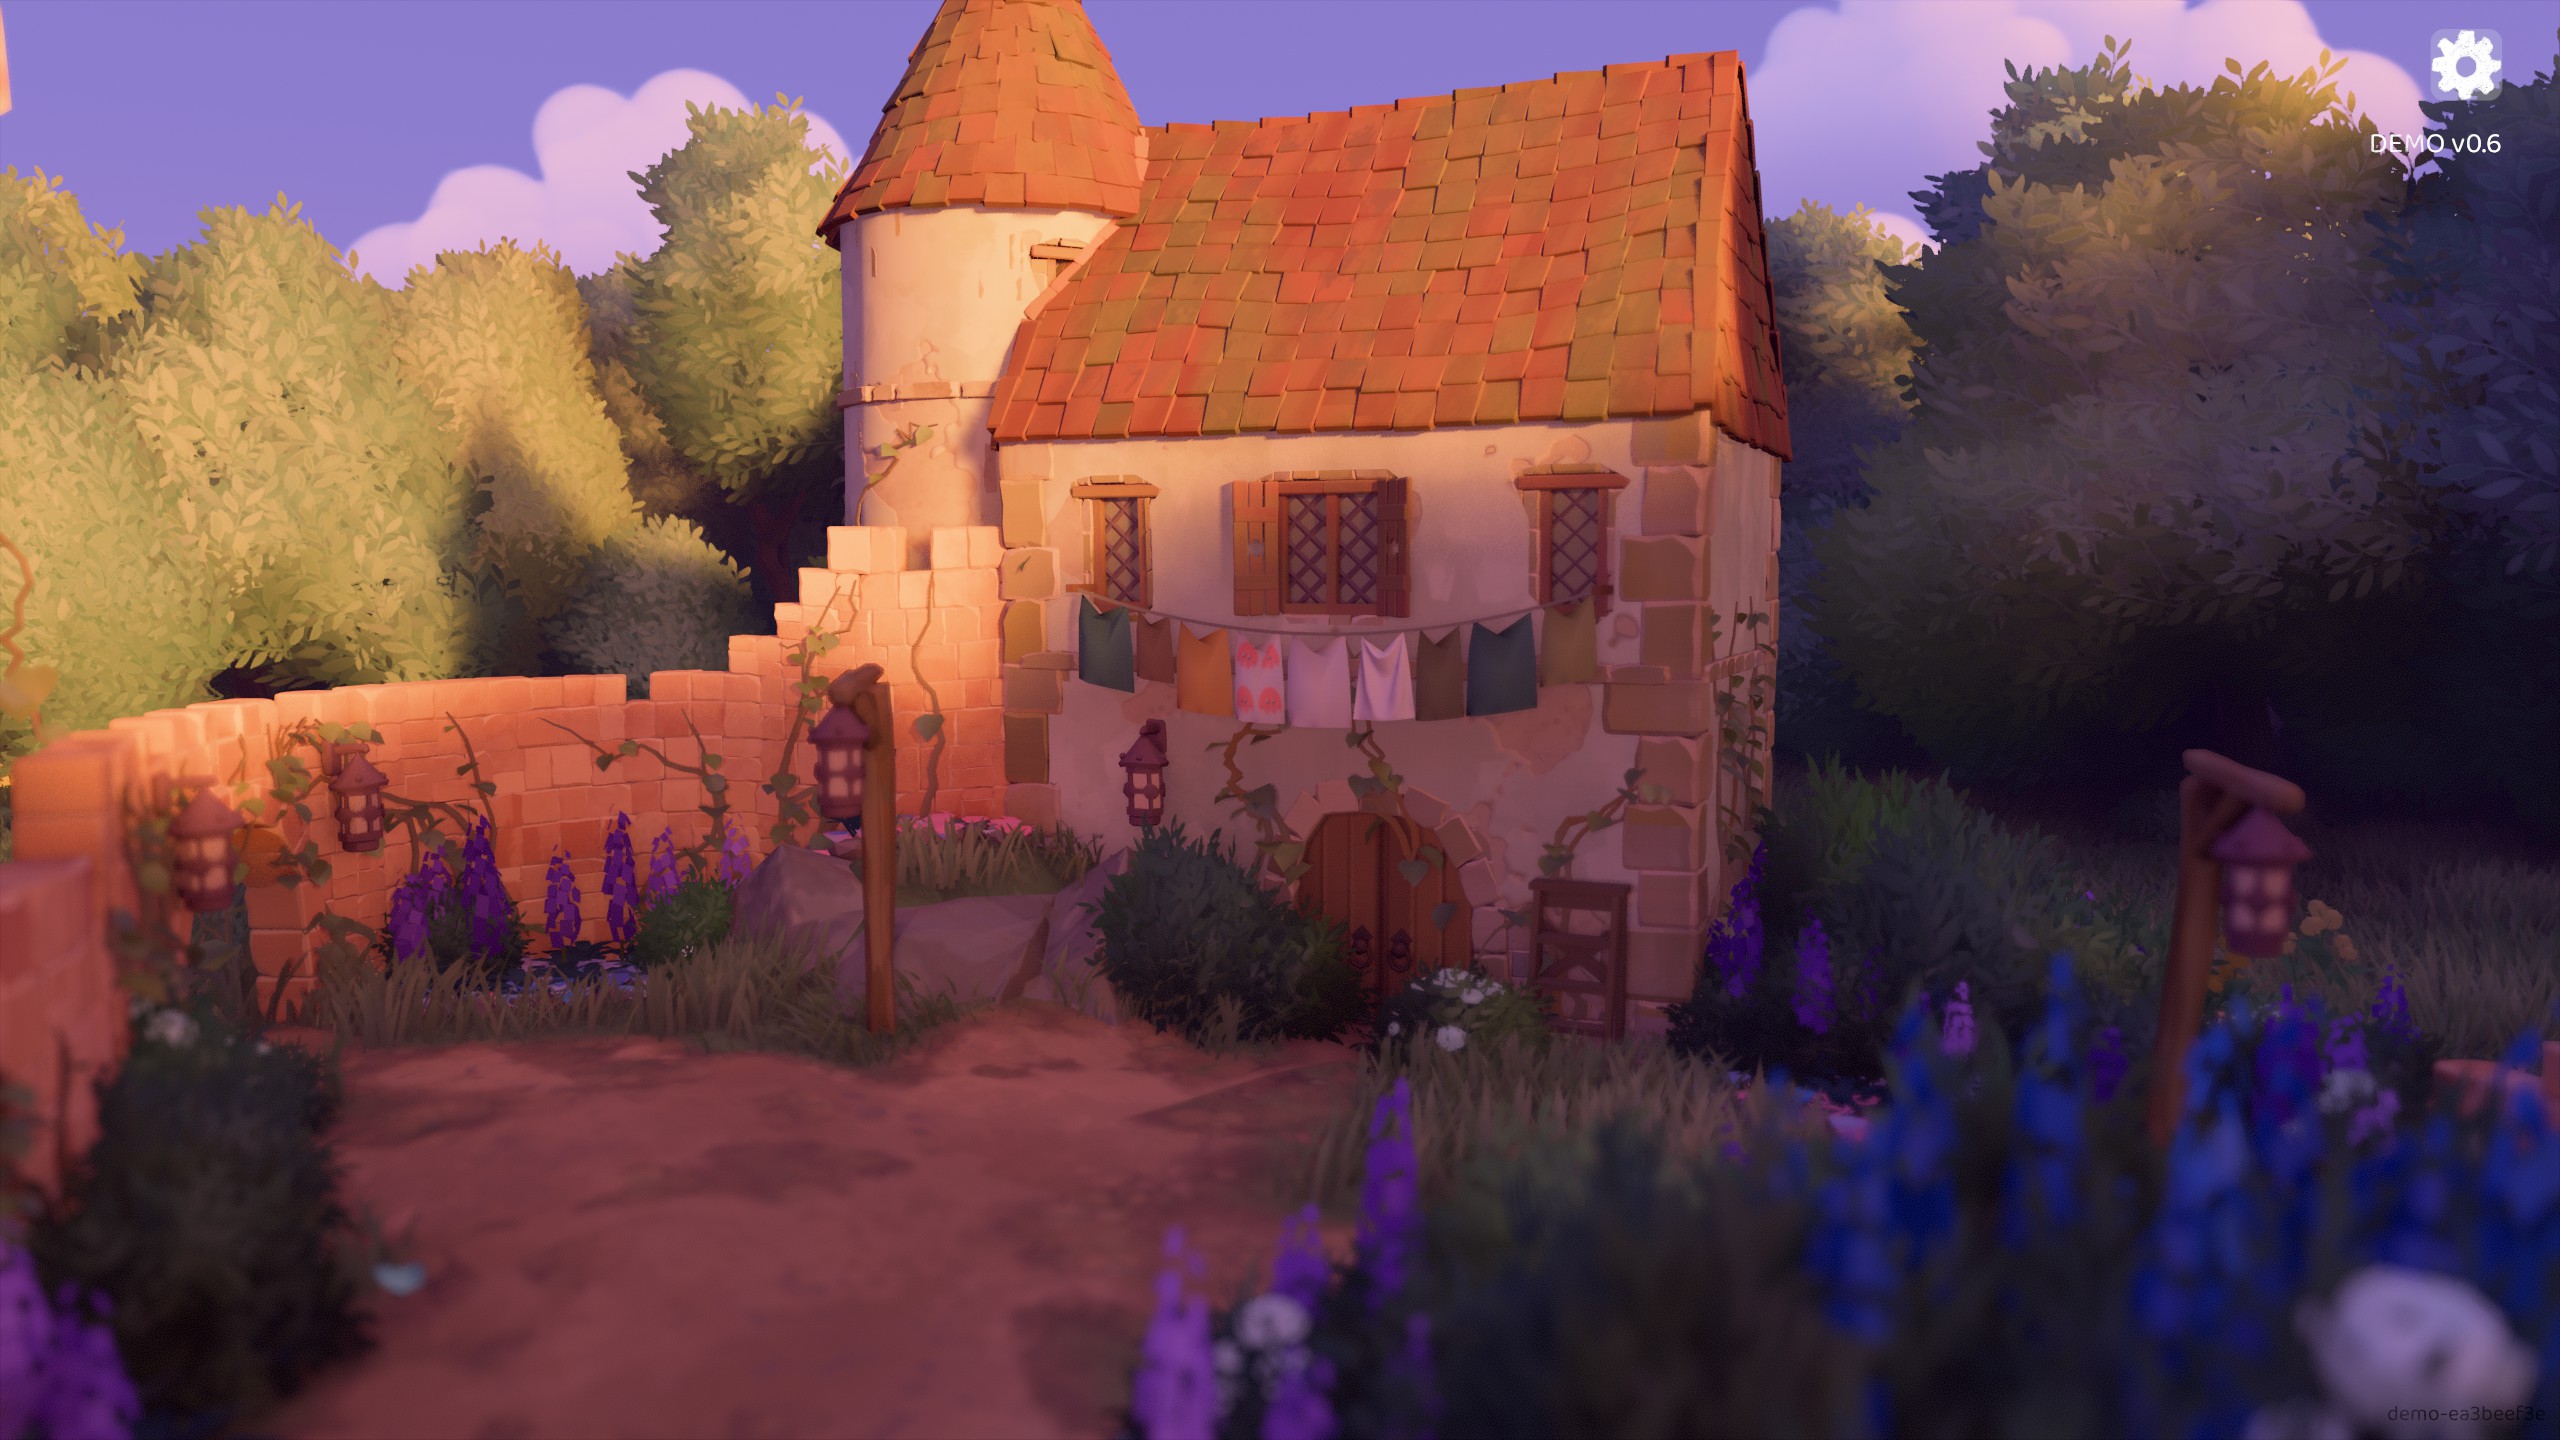 Tiny Glade - a small house at sunset with a washing line hanging between two windows